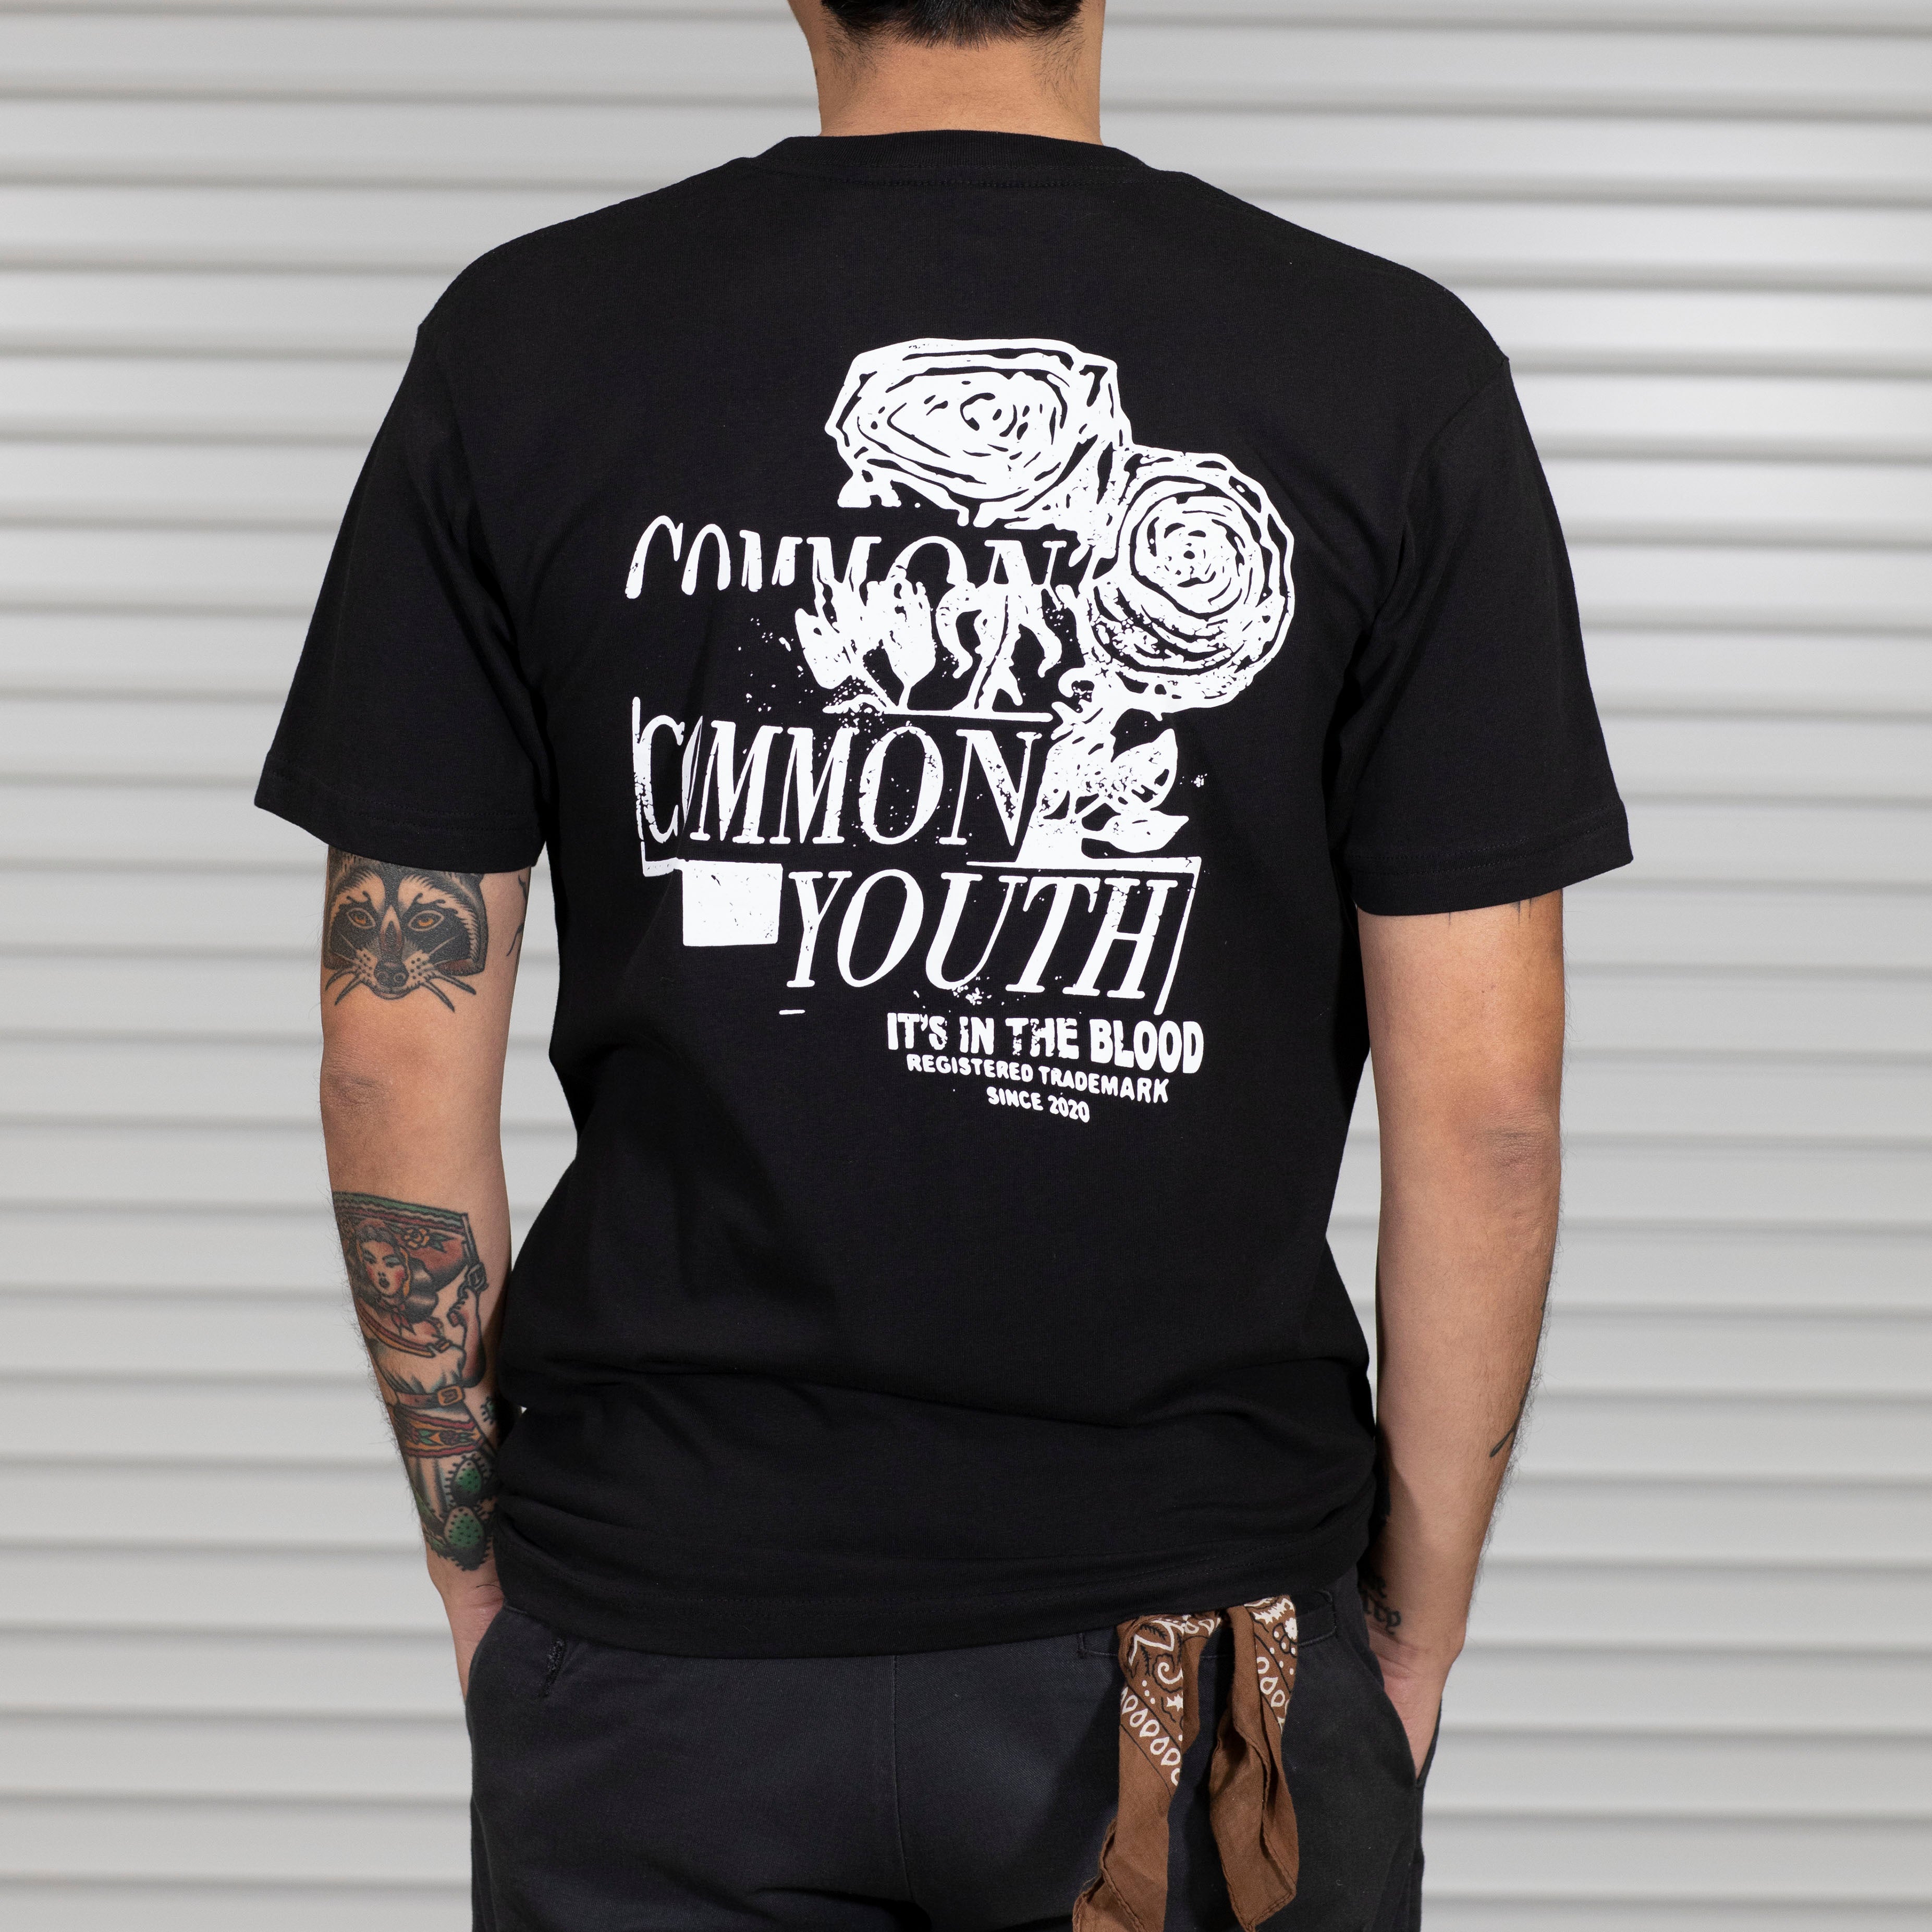 TITLE SS - commonyouthbrand